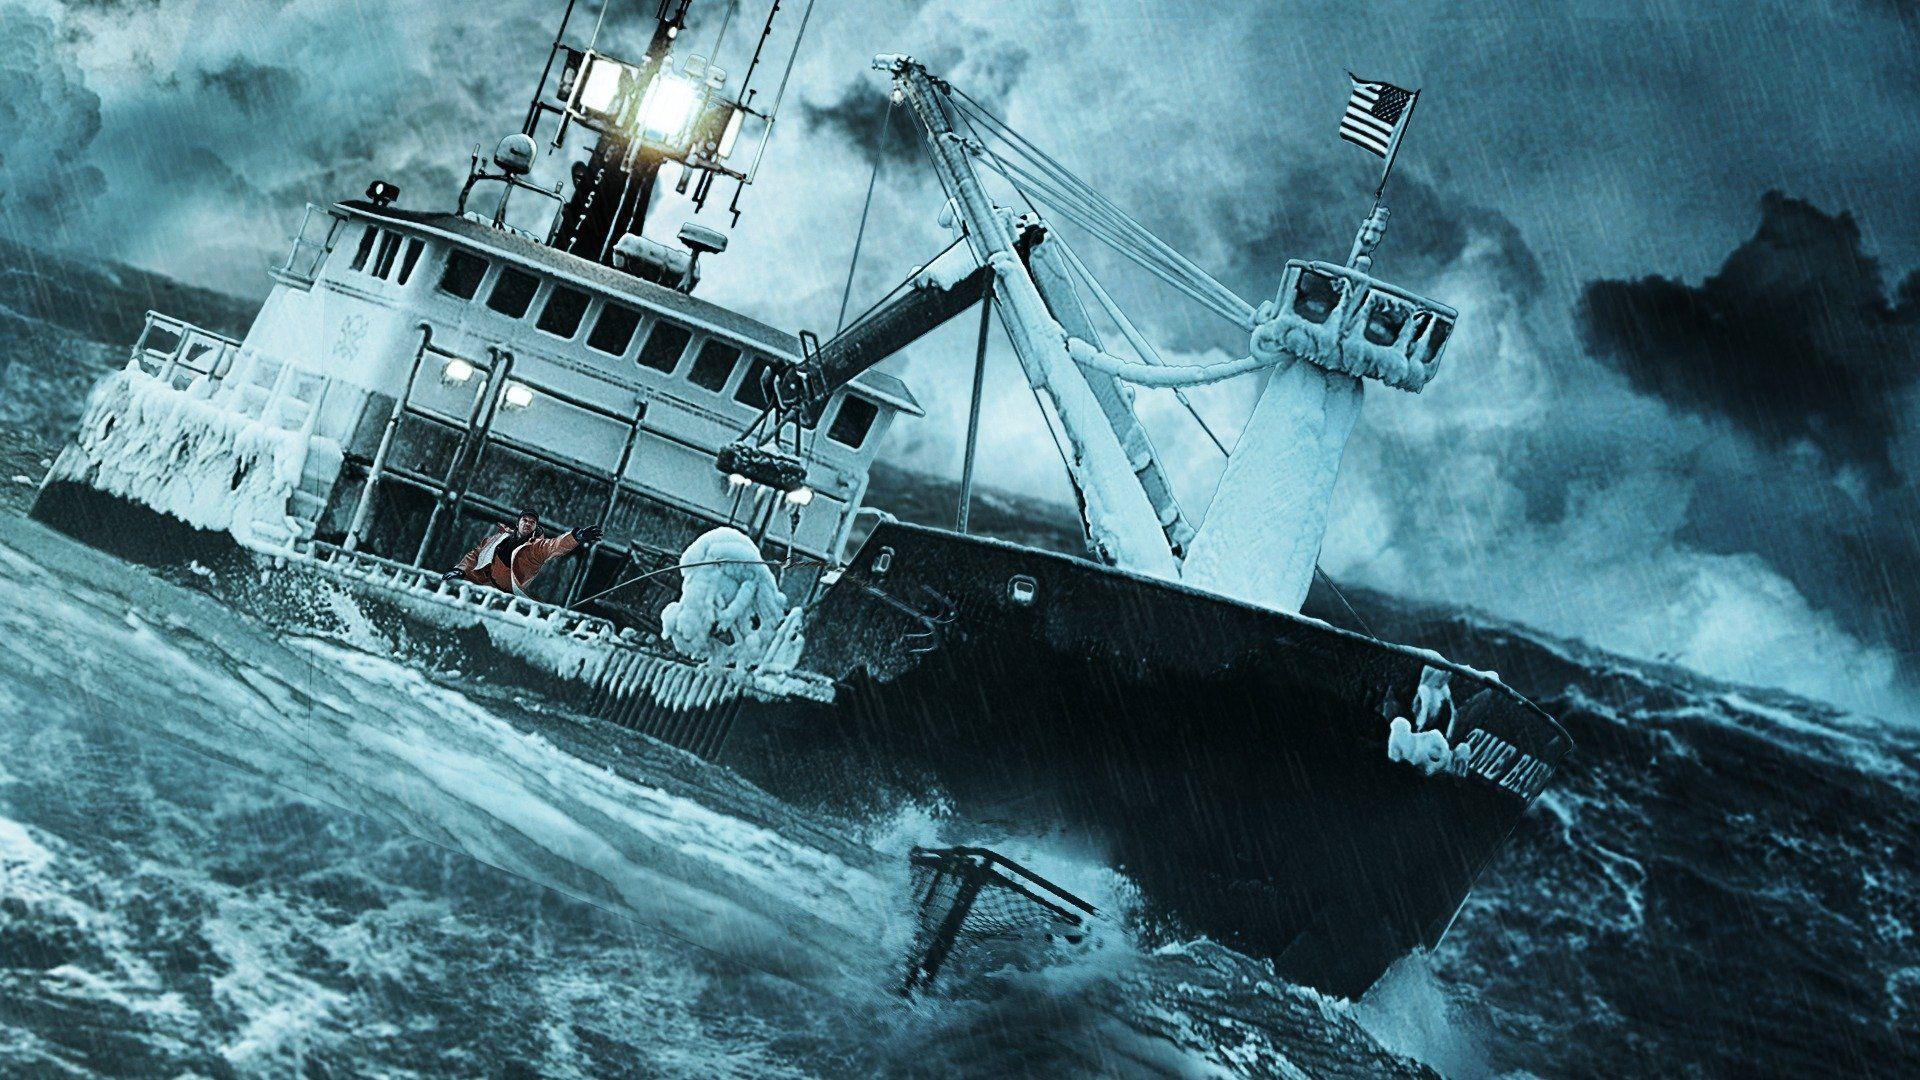 Deadliest Catch. Discovery Canada. Watch Full Episodes for Free